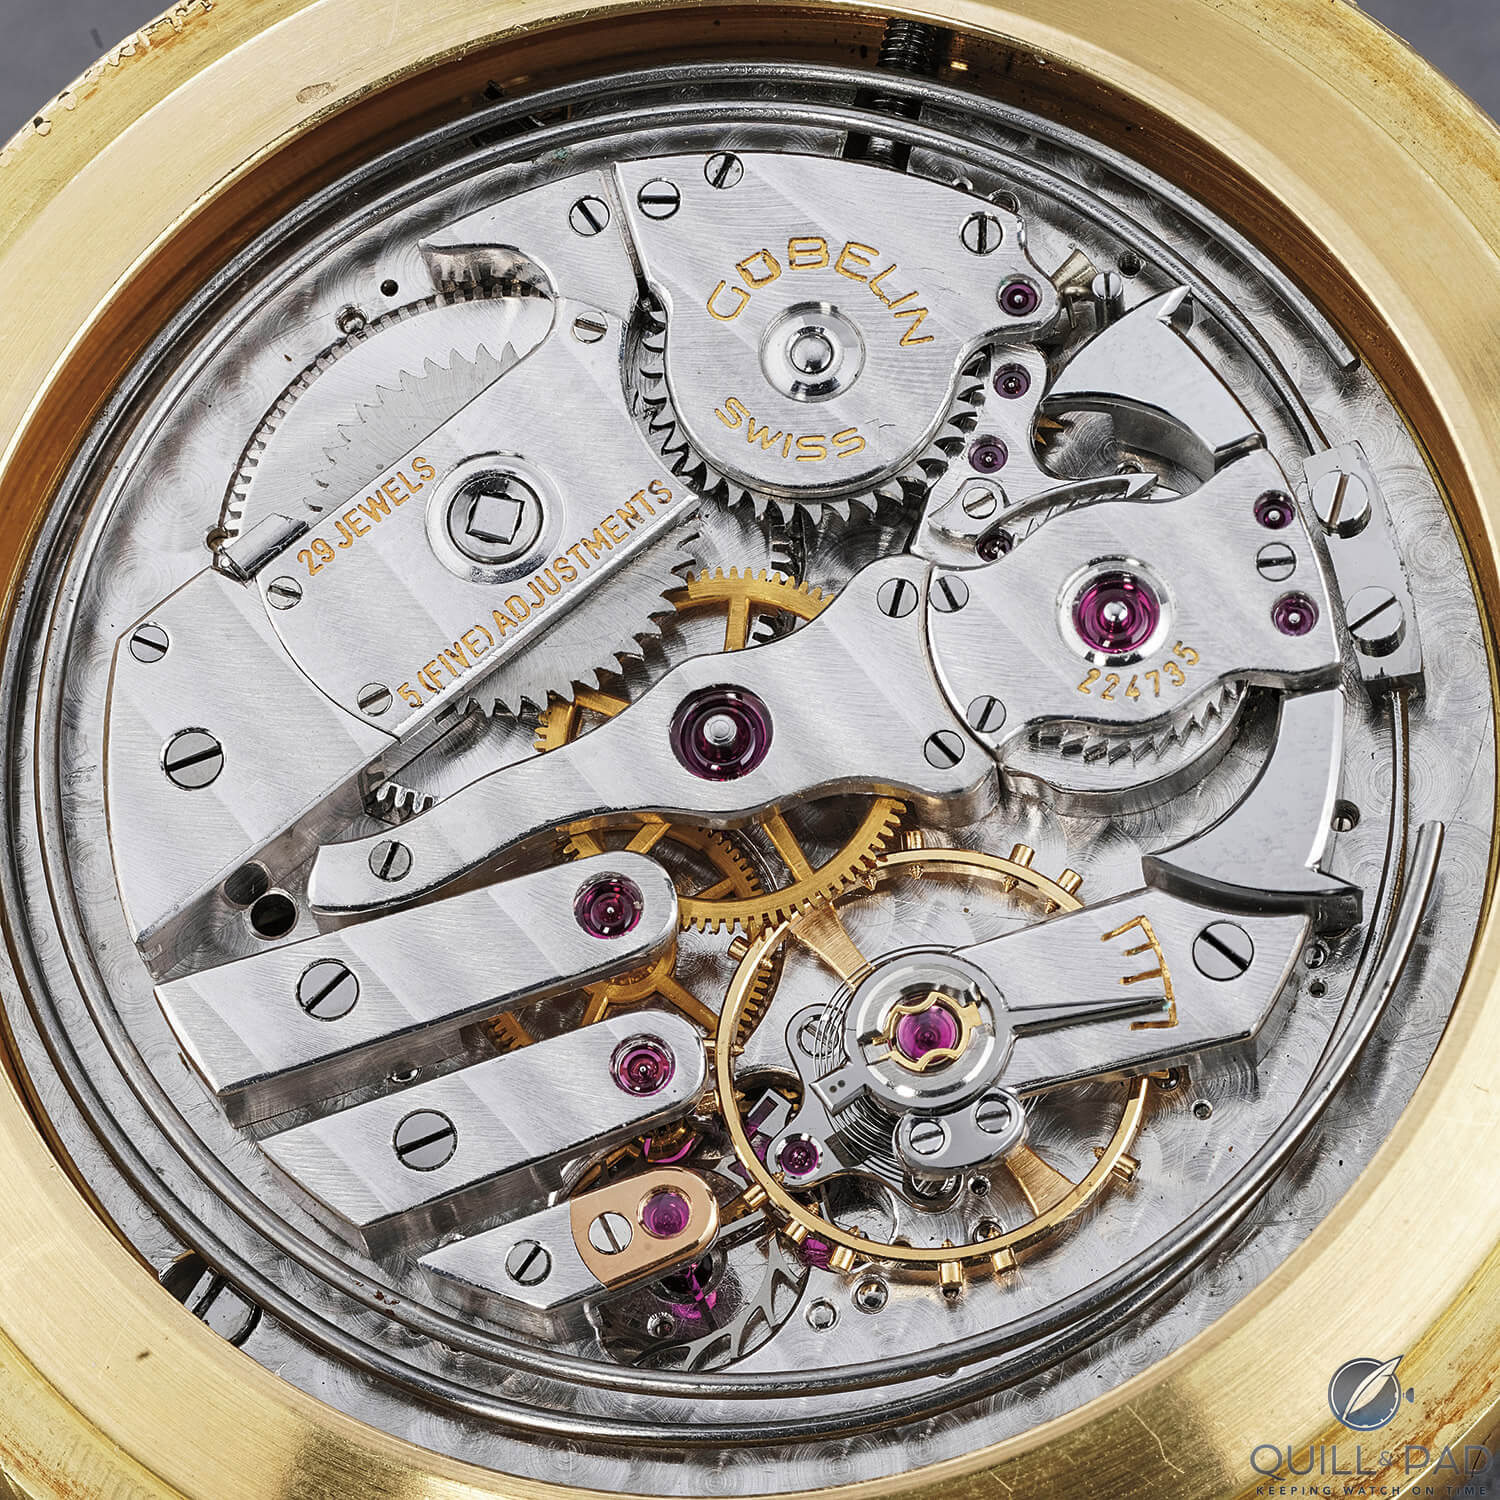 Movement of the Richard Daners Minute Repeater for Gübelin (photo courtesy Phillips auctions)